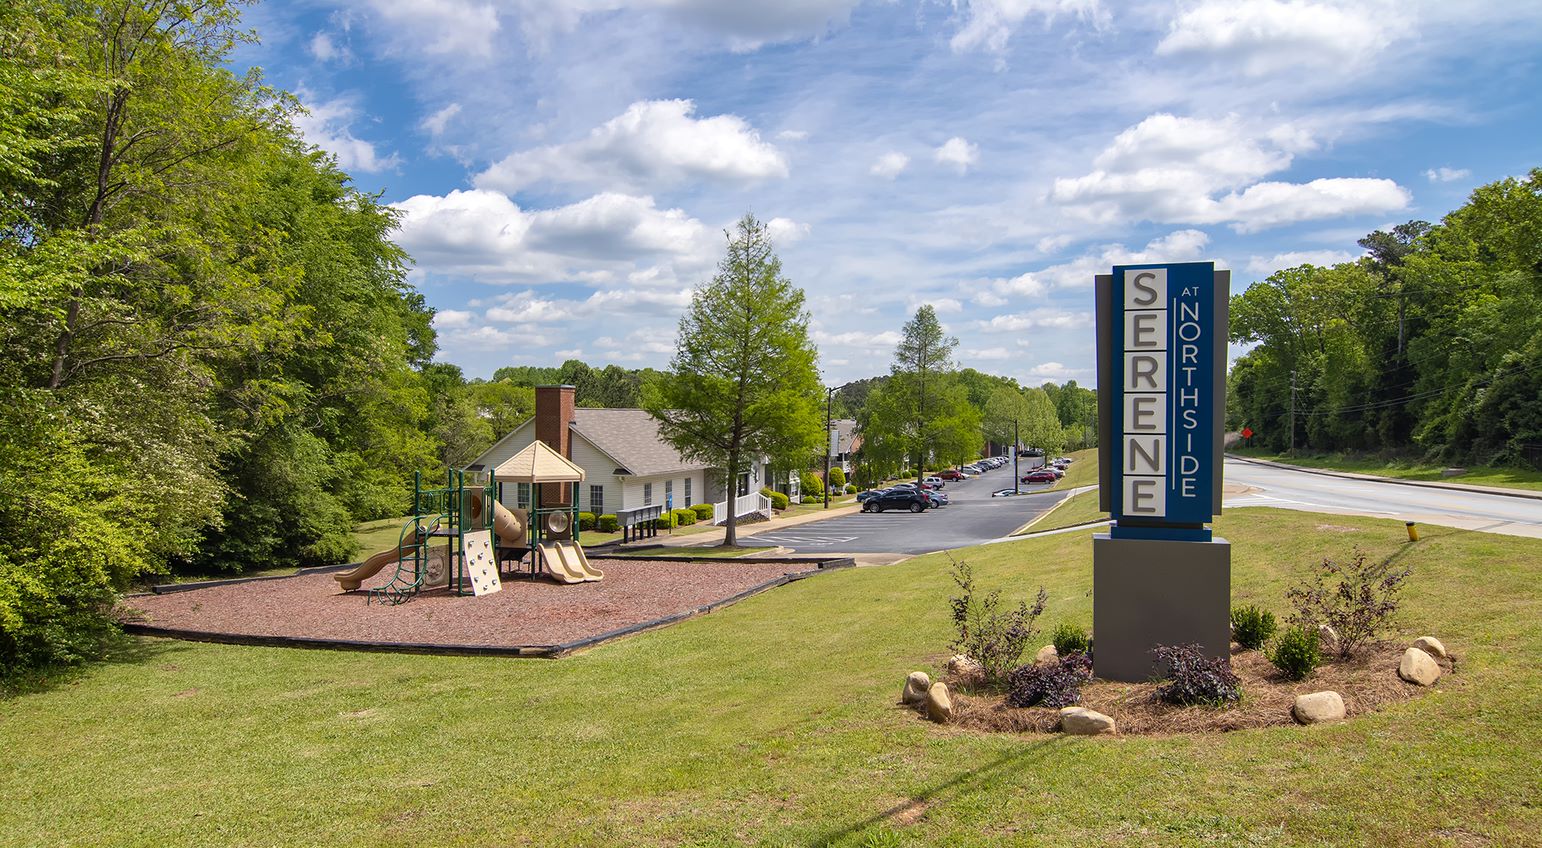 View of the entrance to Serene at Northside Apartments, located in Athens, GA